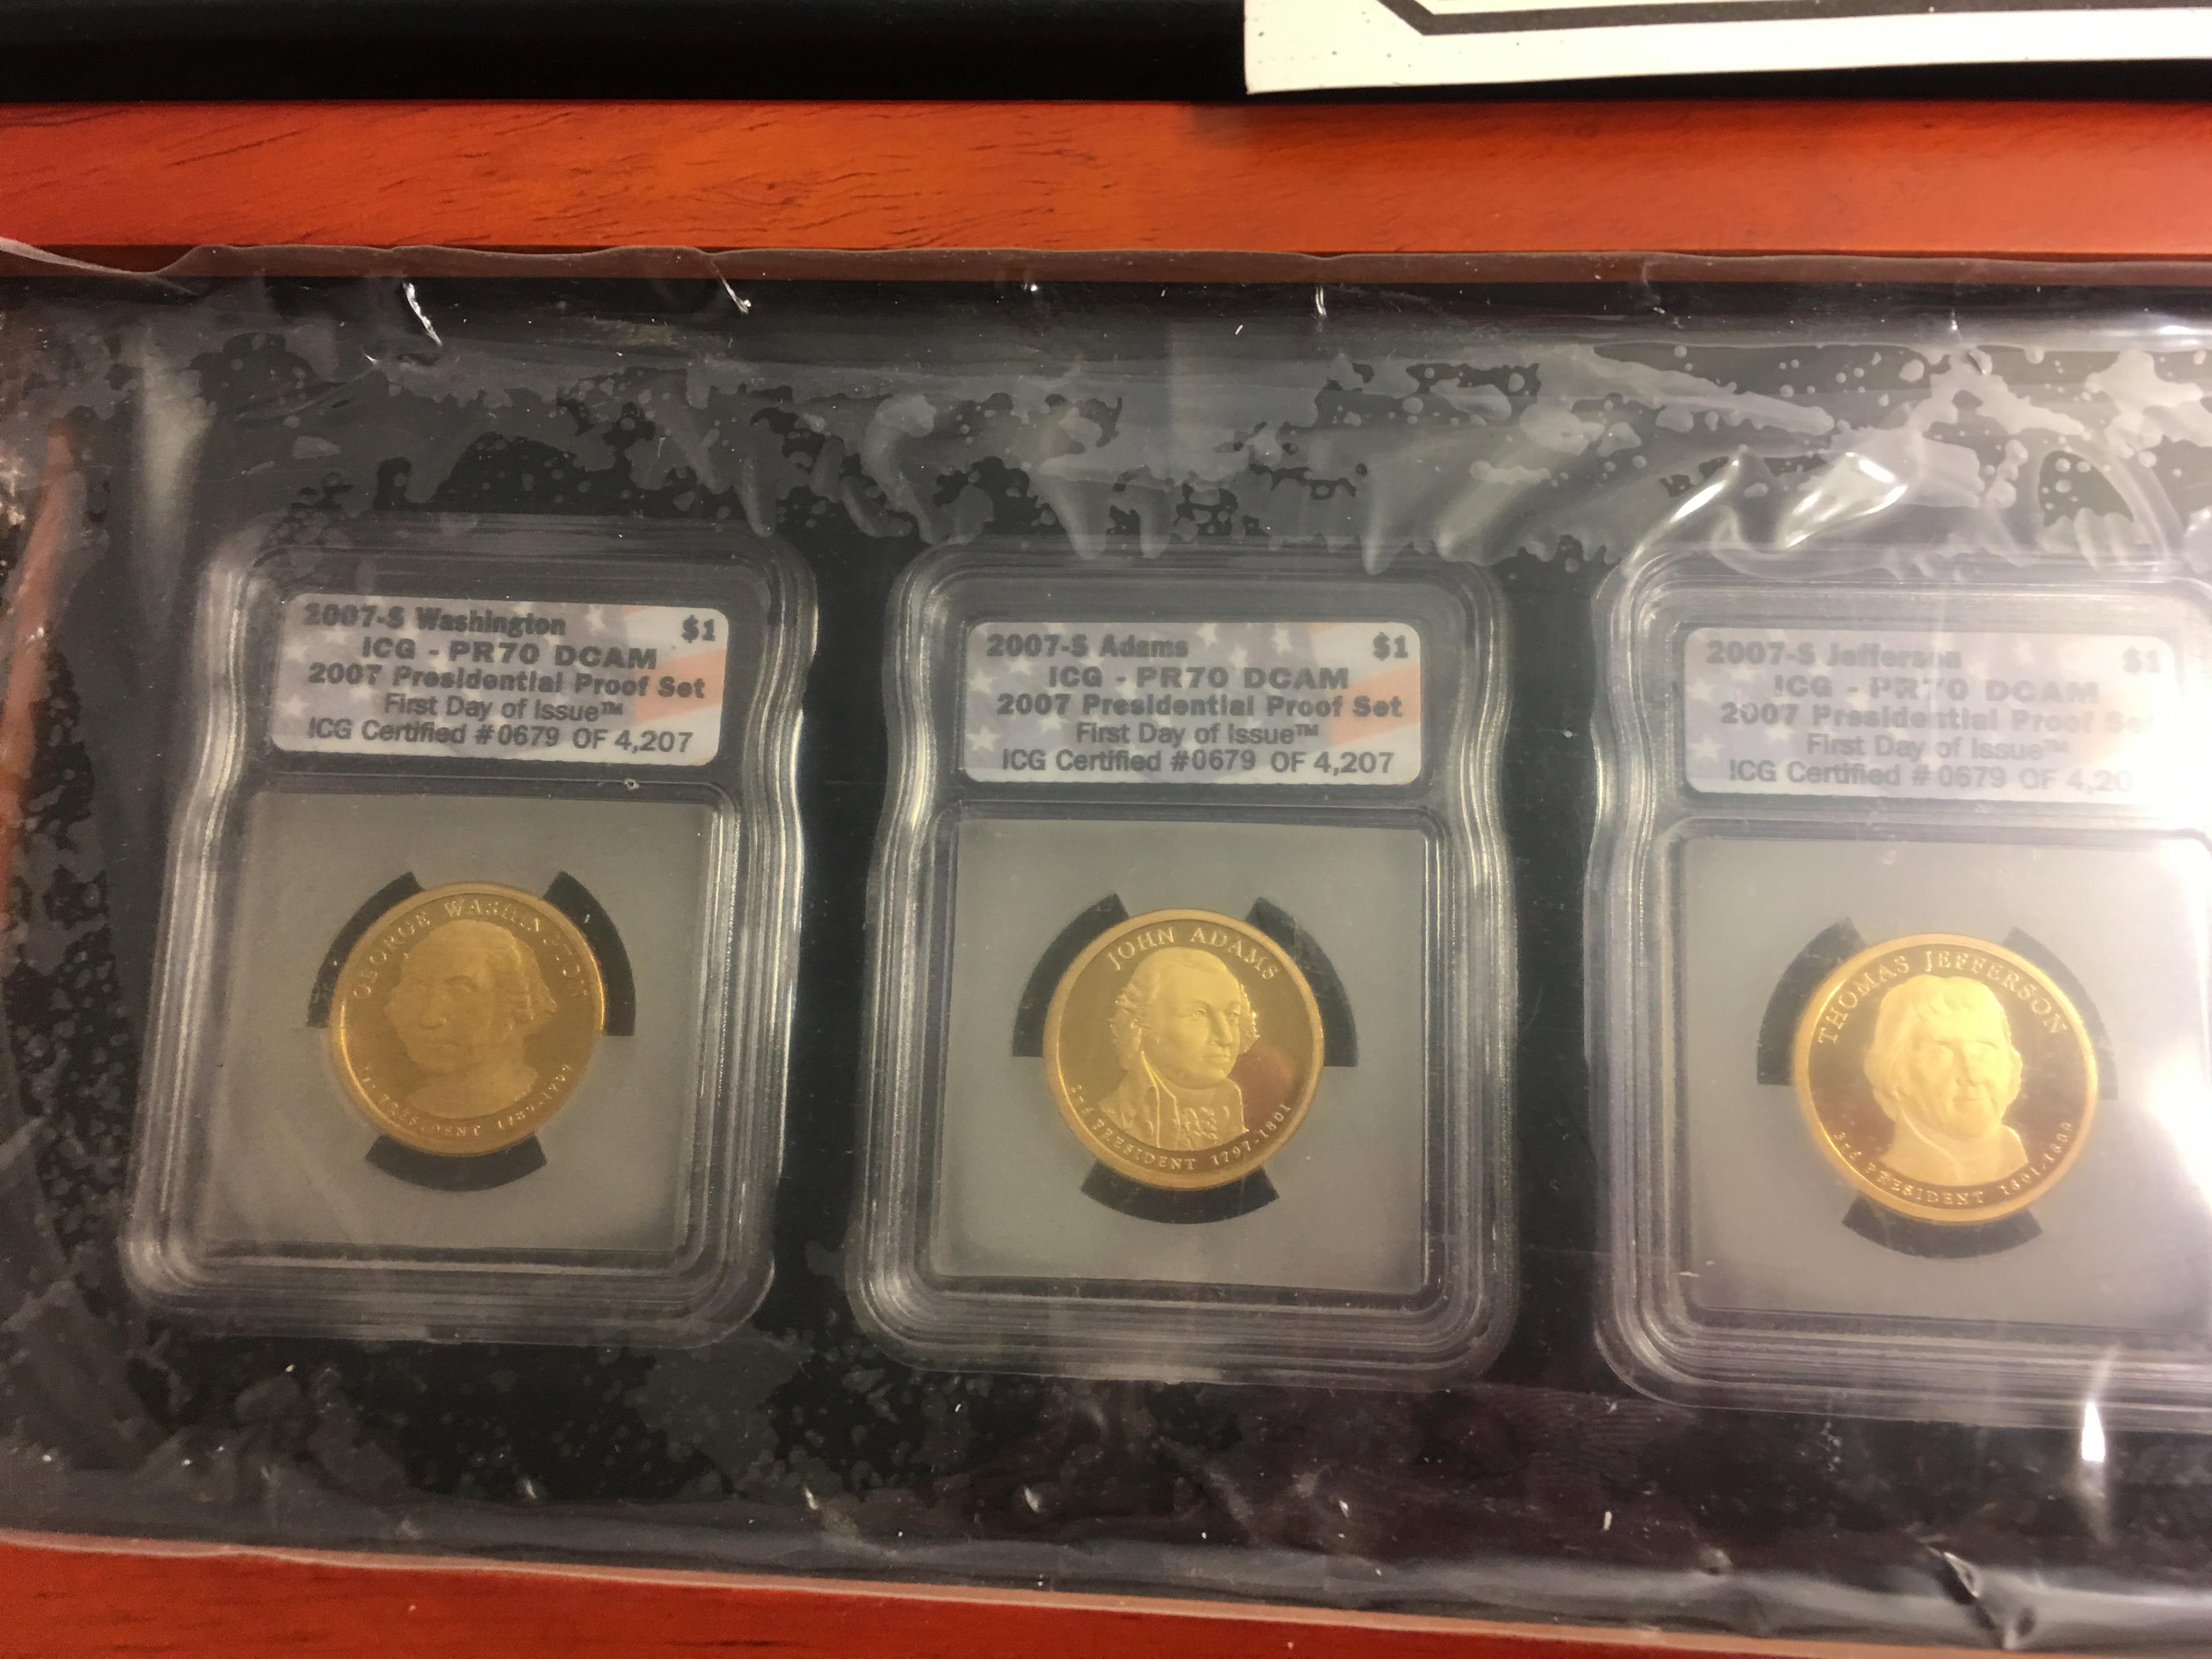 Collector 2007 Presidential Proof Set $1 First Commemorative Mint Collection Coins in Cherry Wood